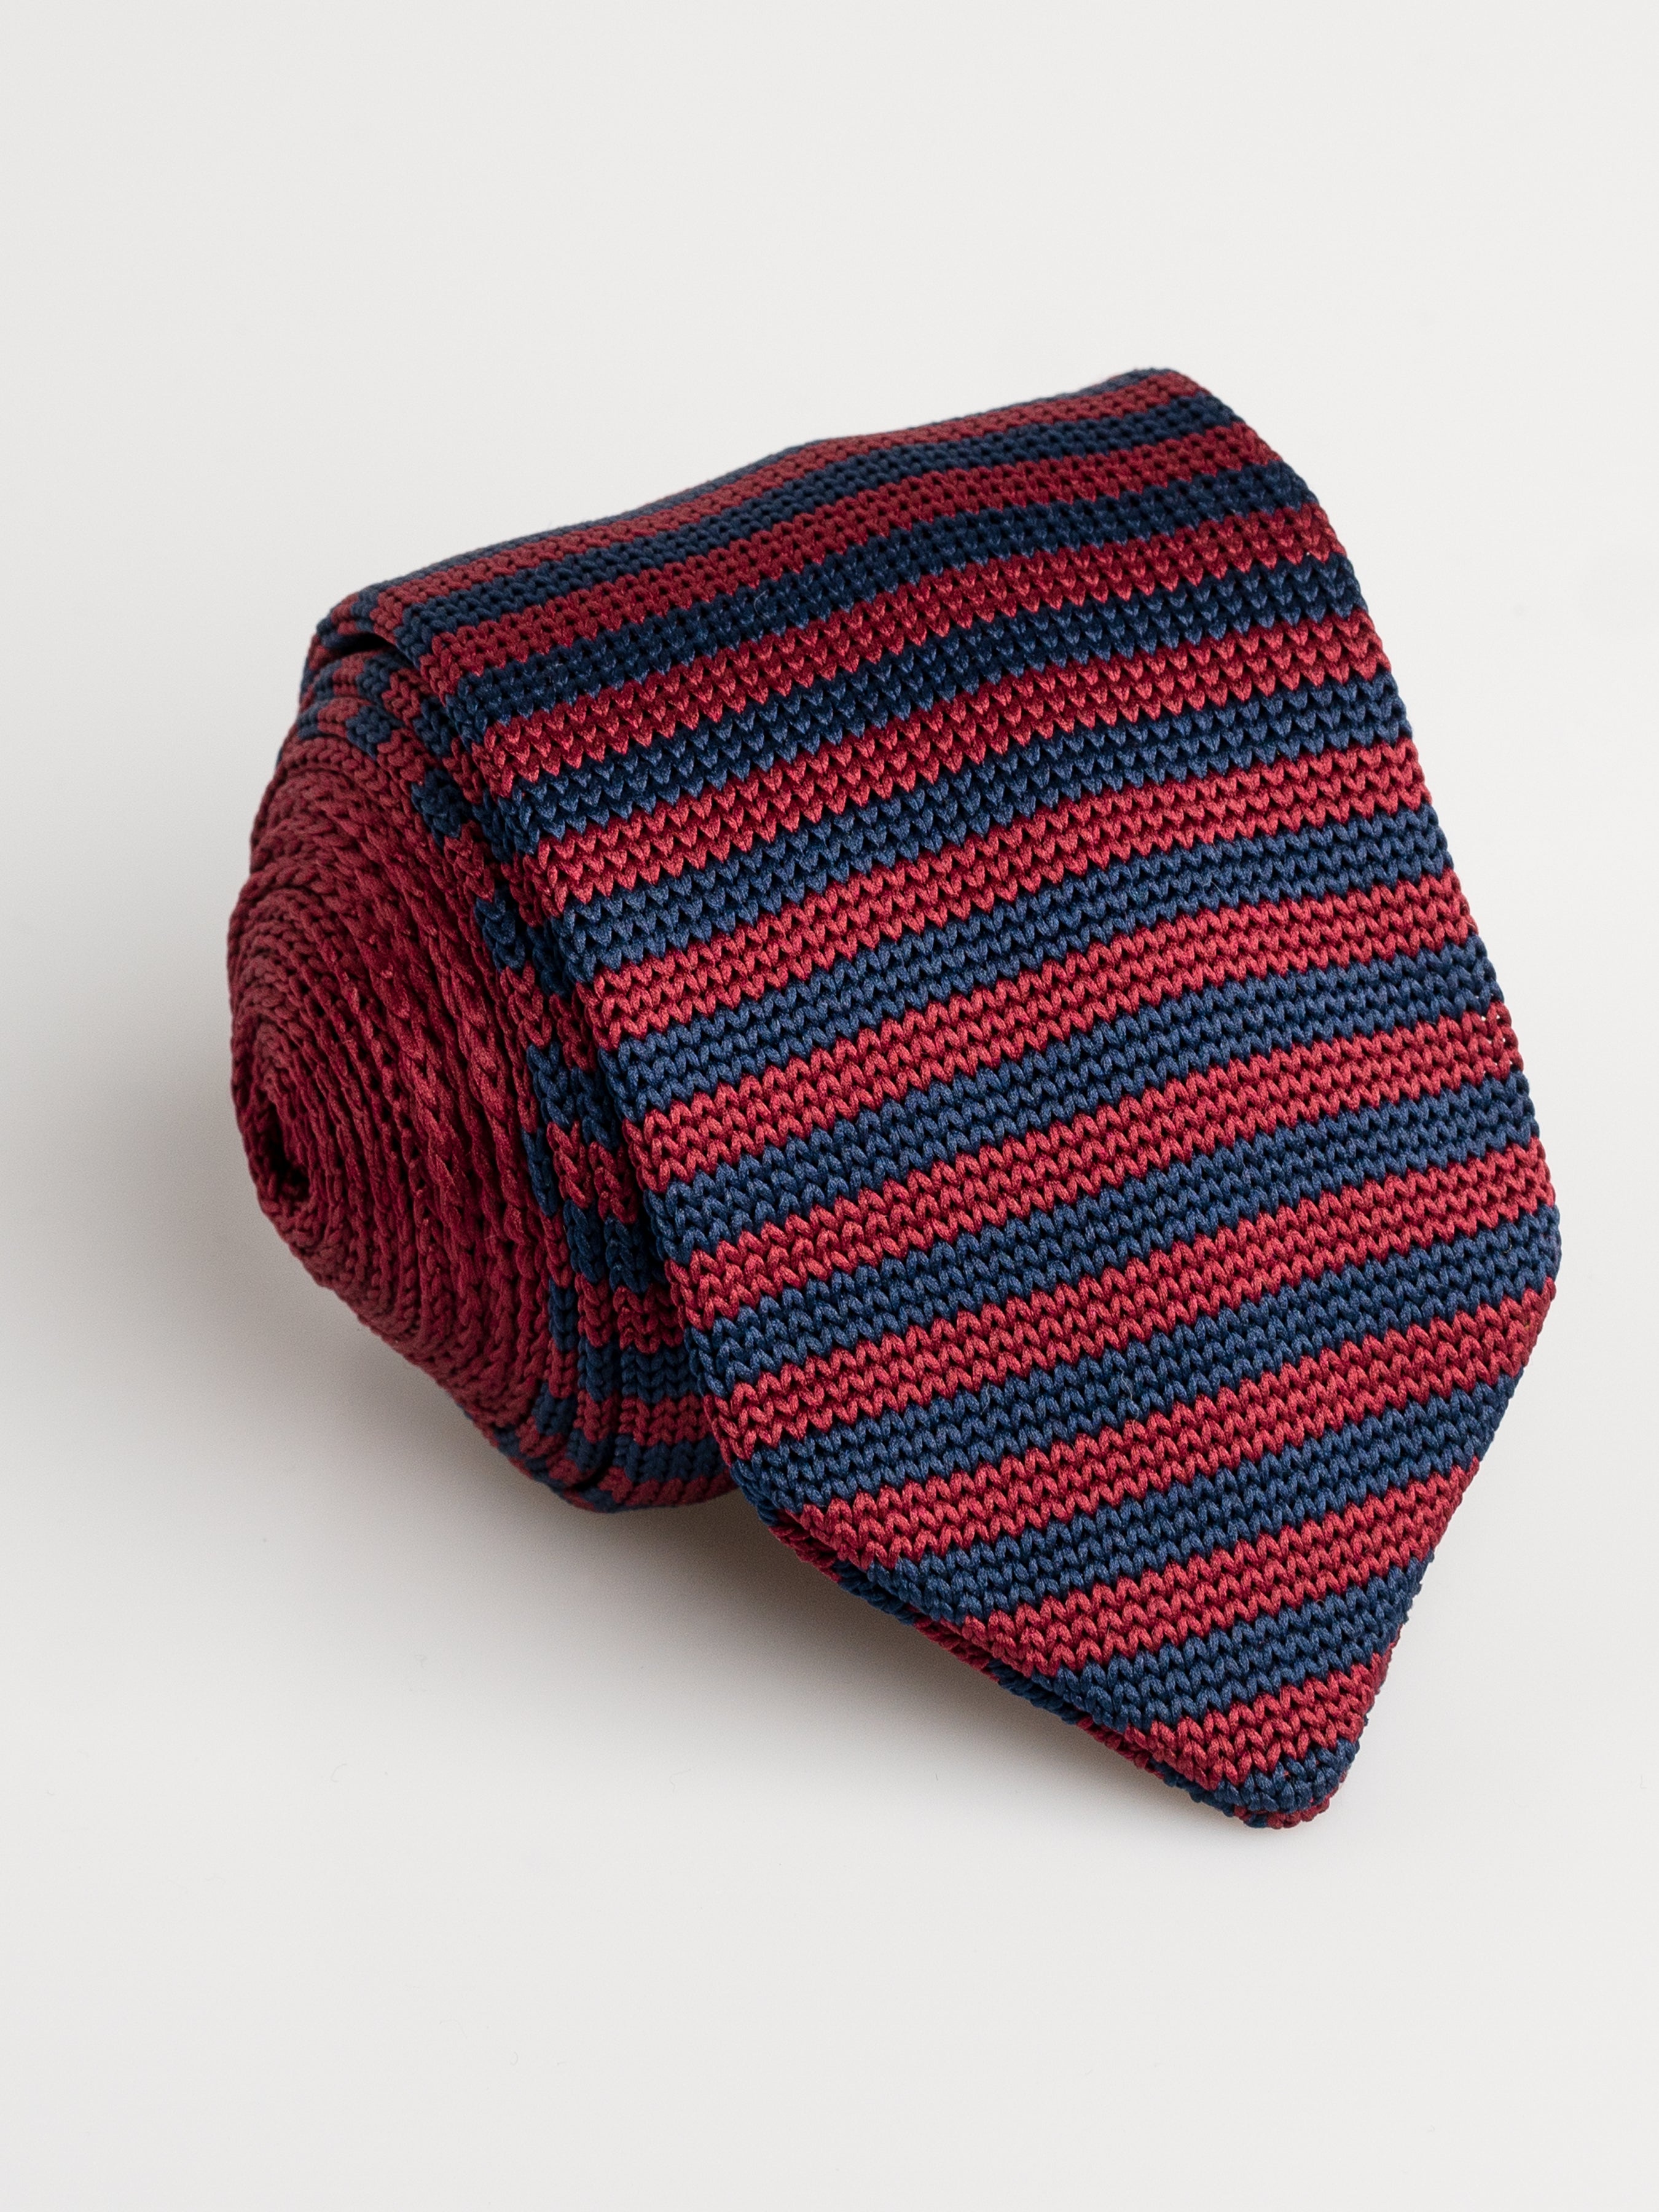 Knit Tie - Red With Blue Stripes